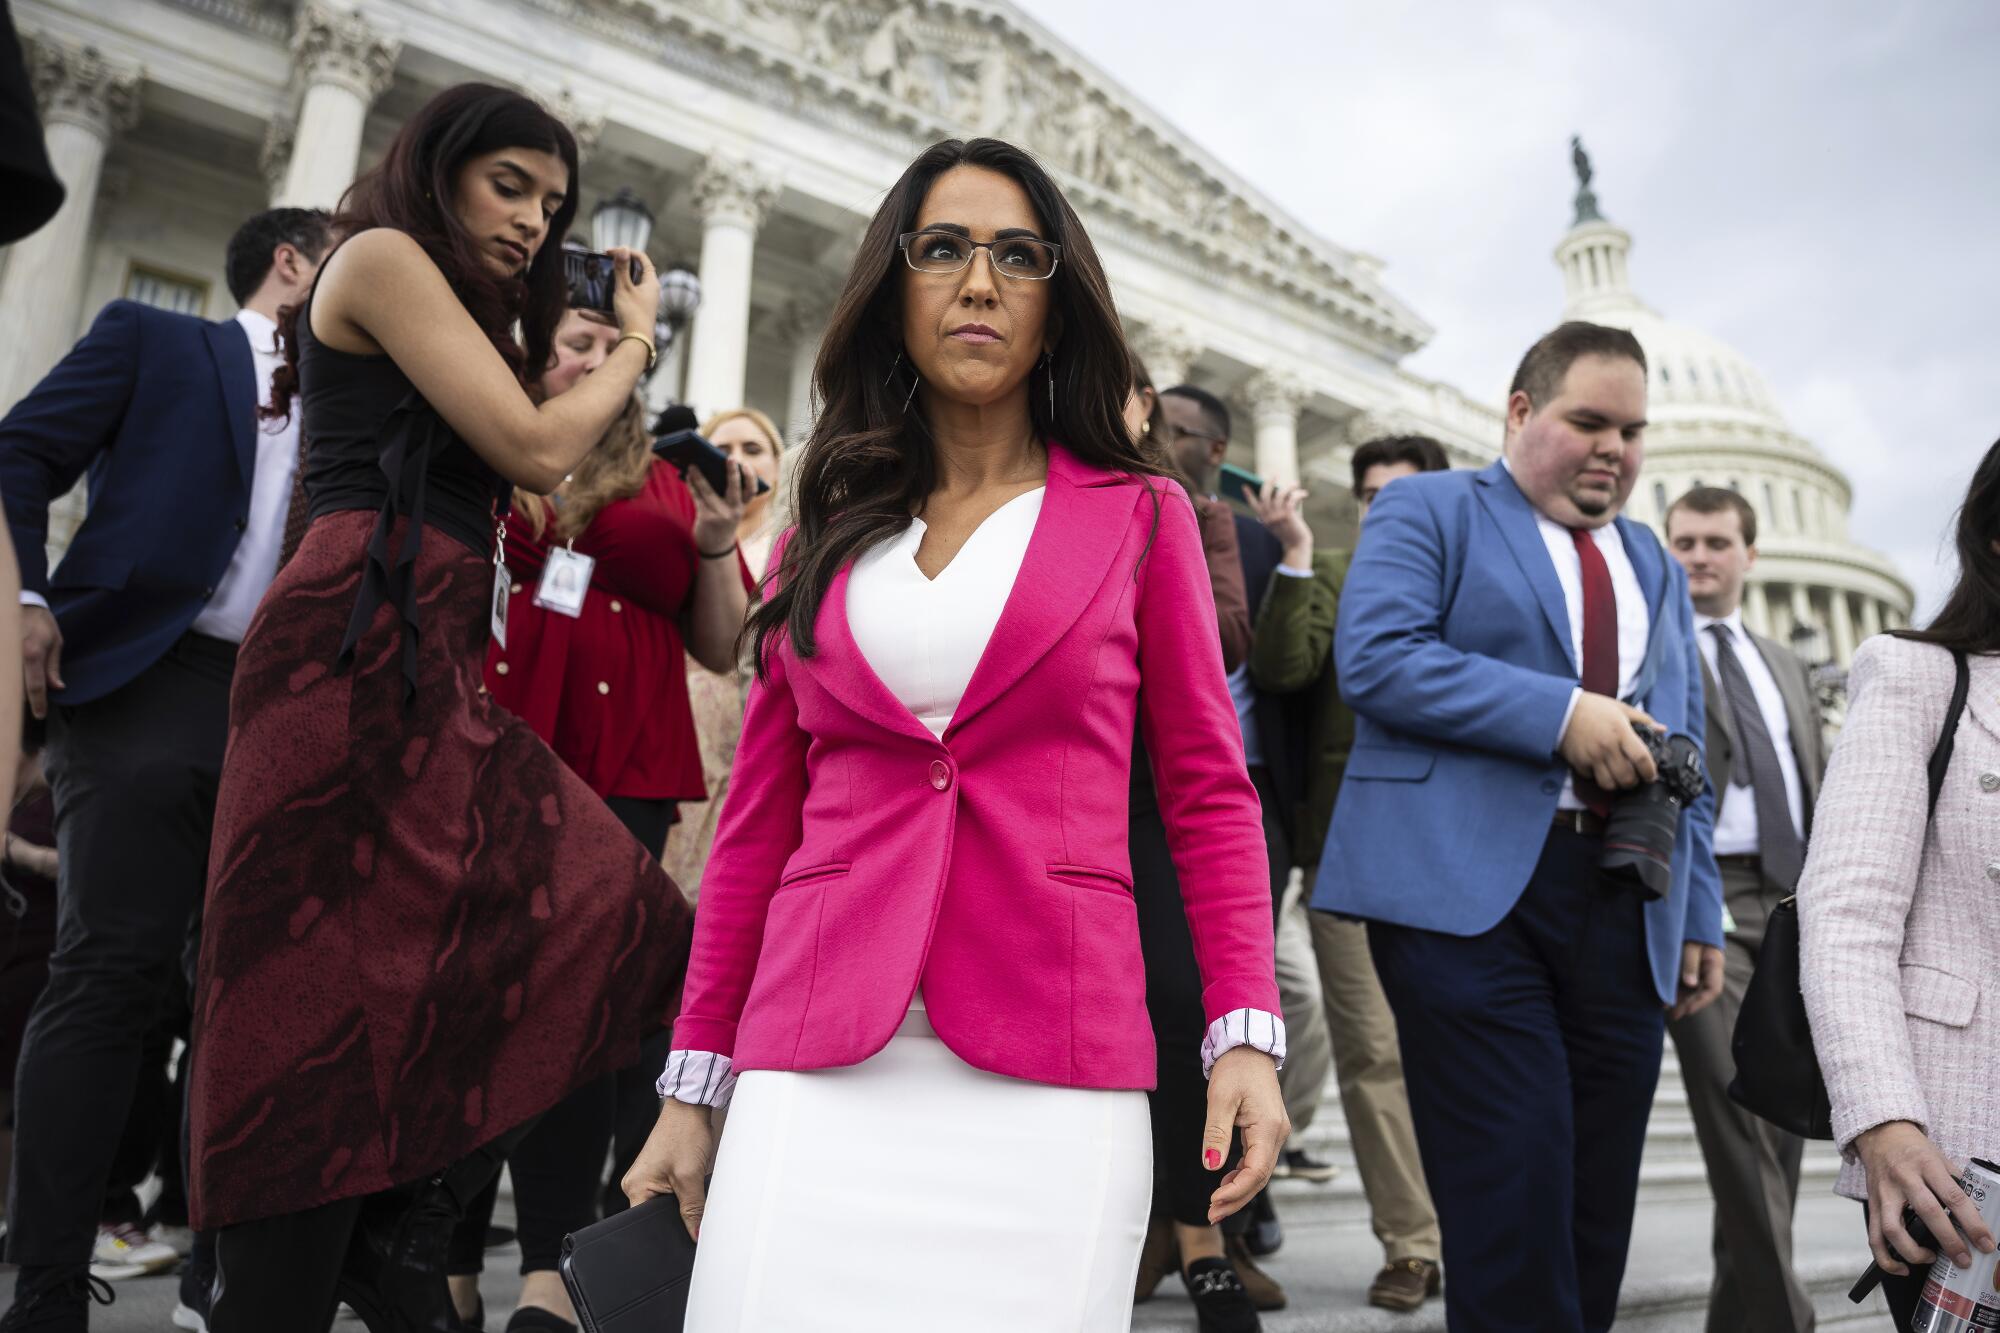 A woman with dark hair, in a white dress and deep pink jacket, stands near other people outside the Capitol